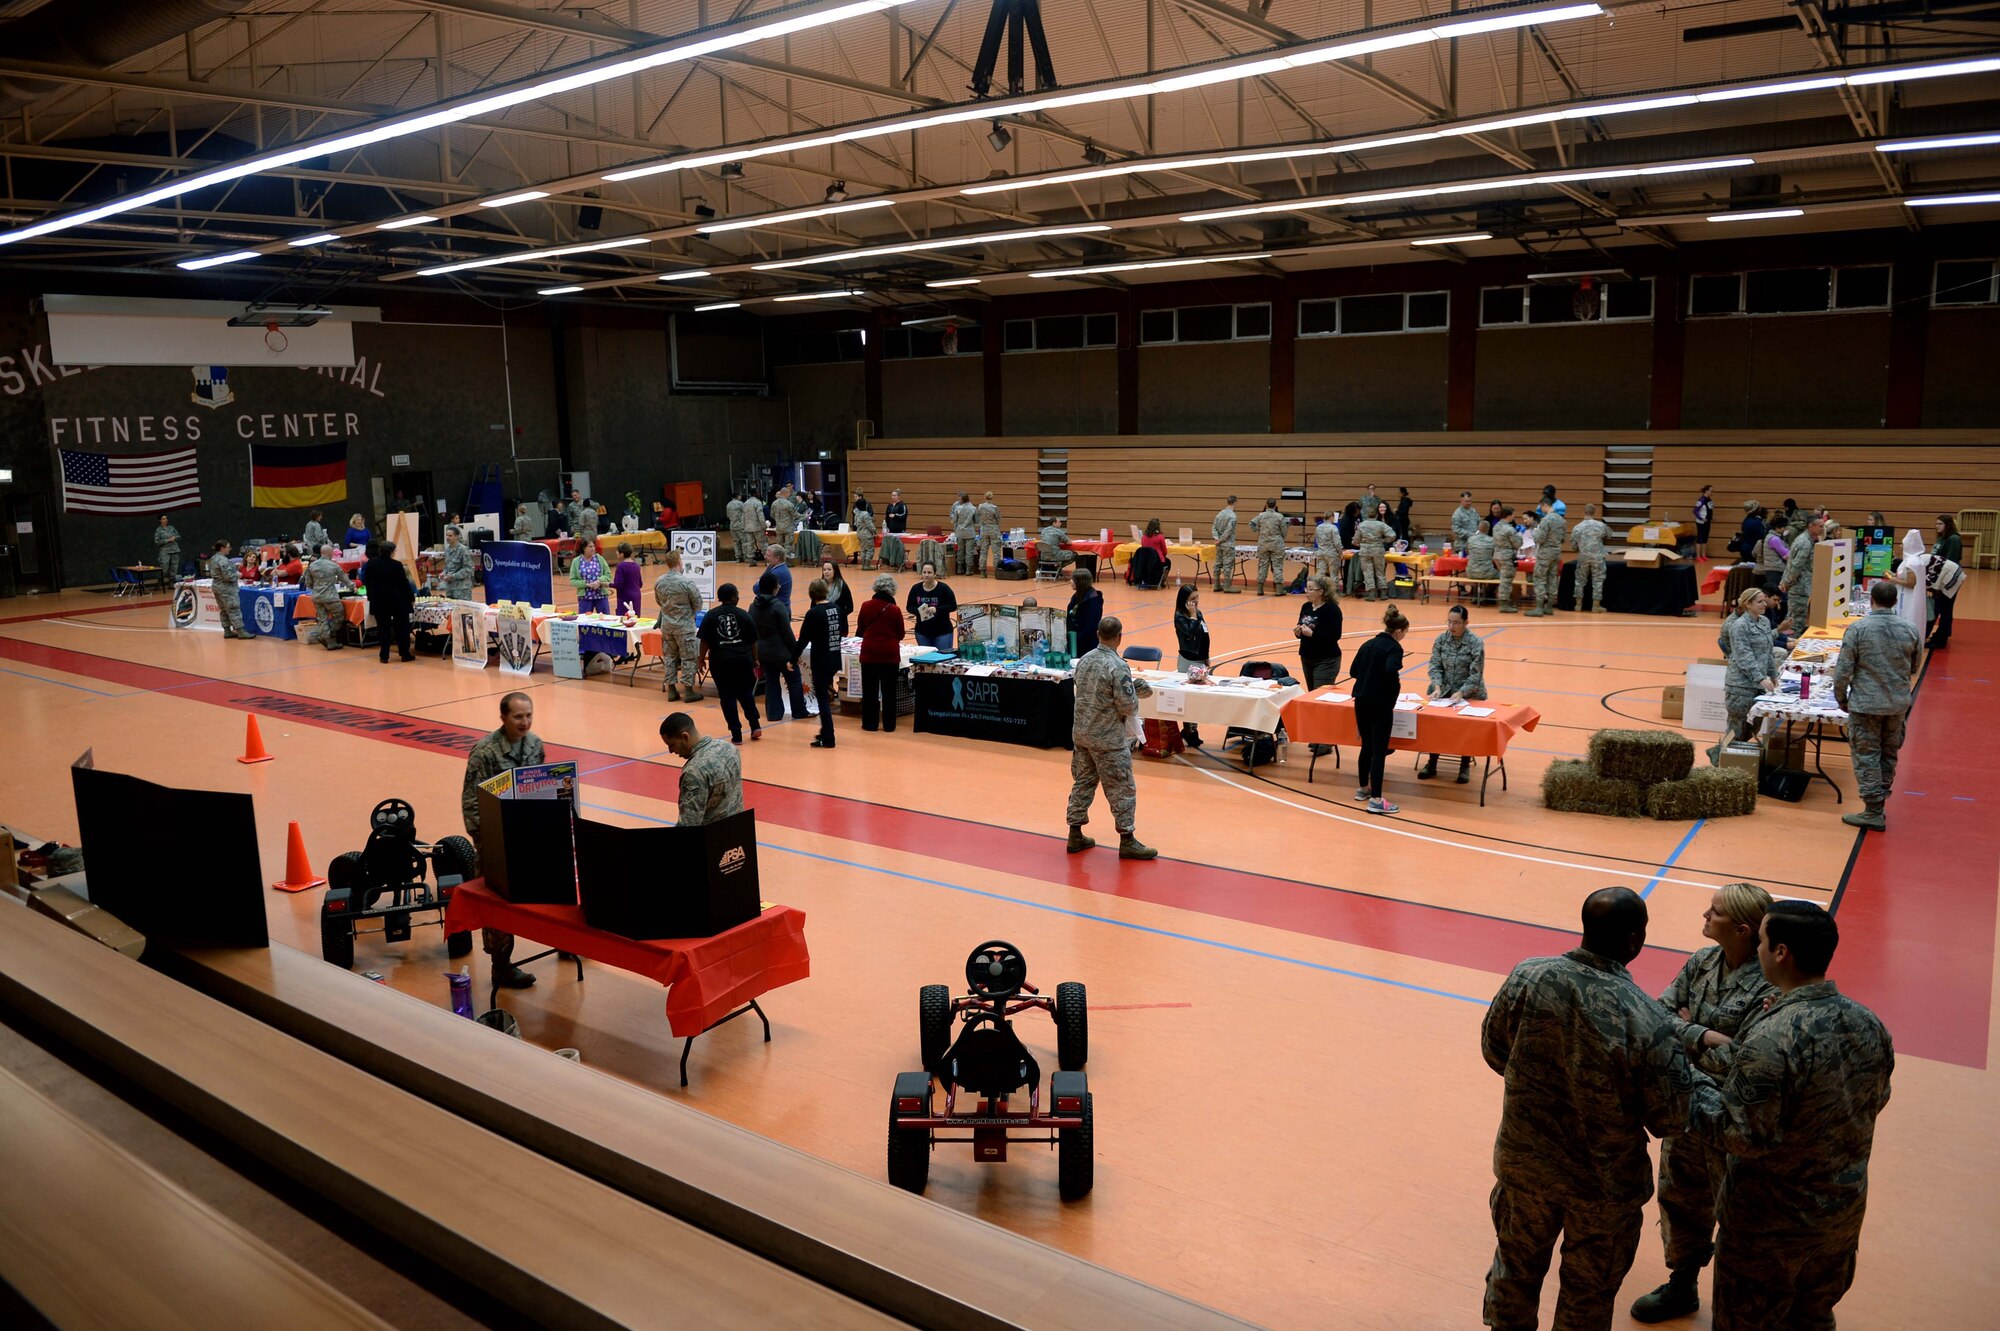 Spangdahlem Airmen and families interact with the 52nd Medical Group Airmen during the 2014 Fall Harvest Health Fair at the Skelton Memorial Fitness Center at Spangdahlem Air Base, Germany, Nov. 5, 2014. The medical group hosted the fair to promote health and fitness by providing free information, health checks and other services. (U.S. Air Force photo by Airman 1st Class Timothy Kim/Released)